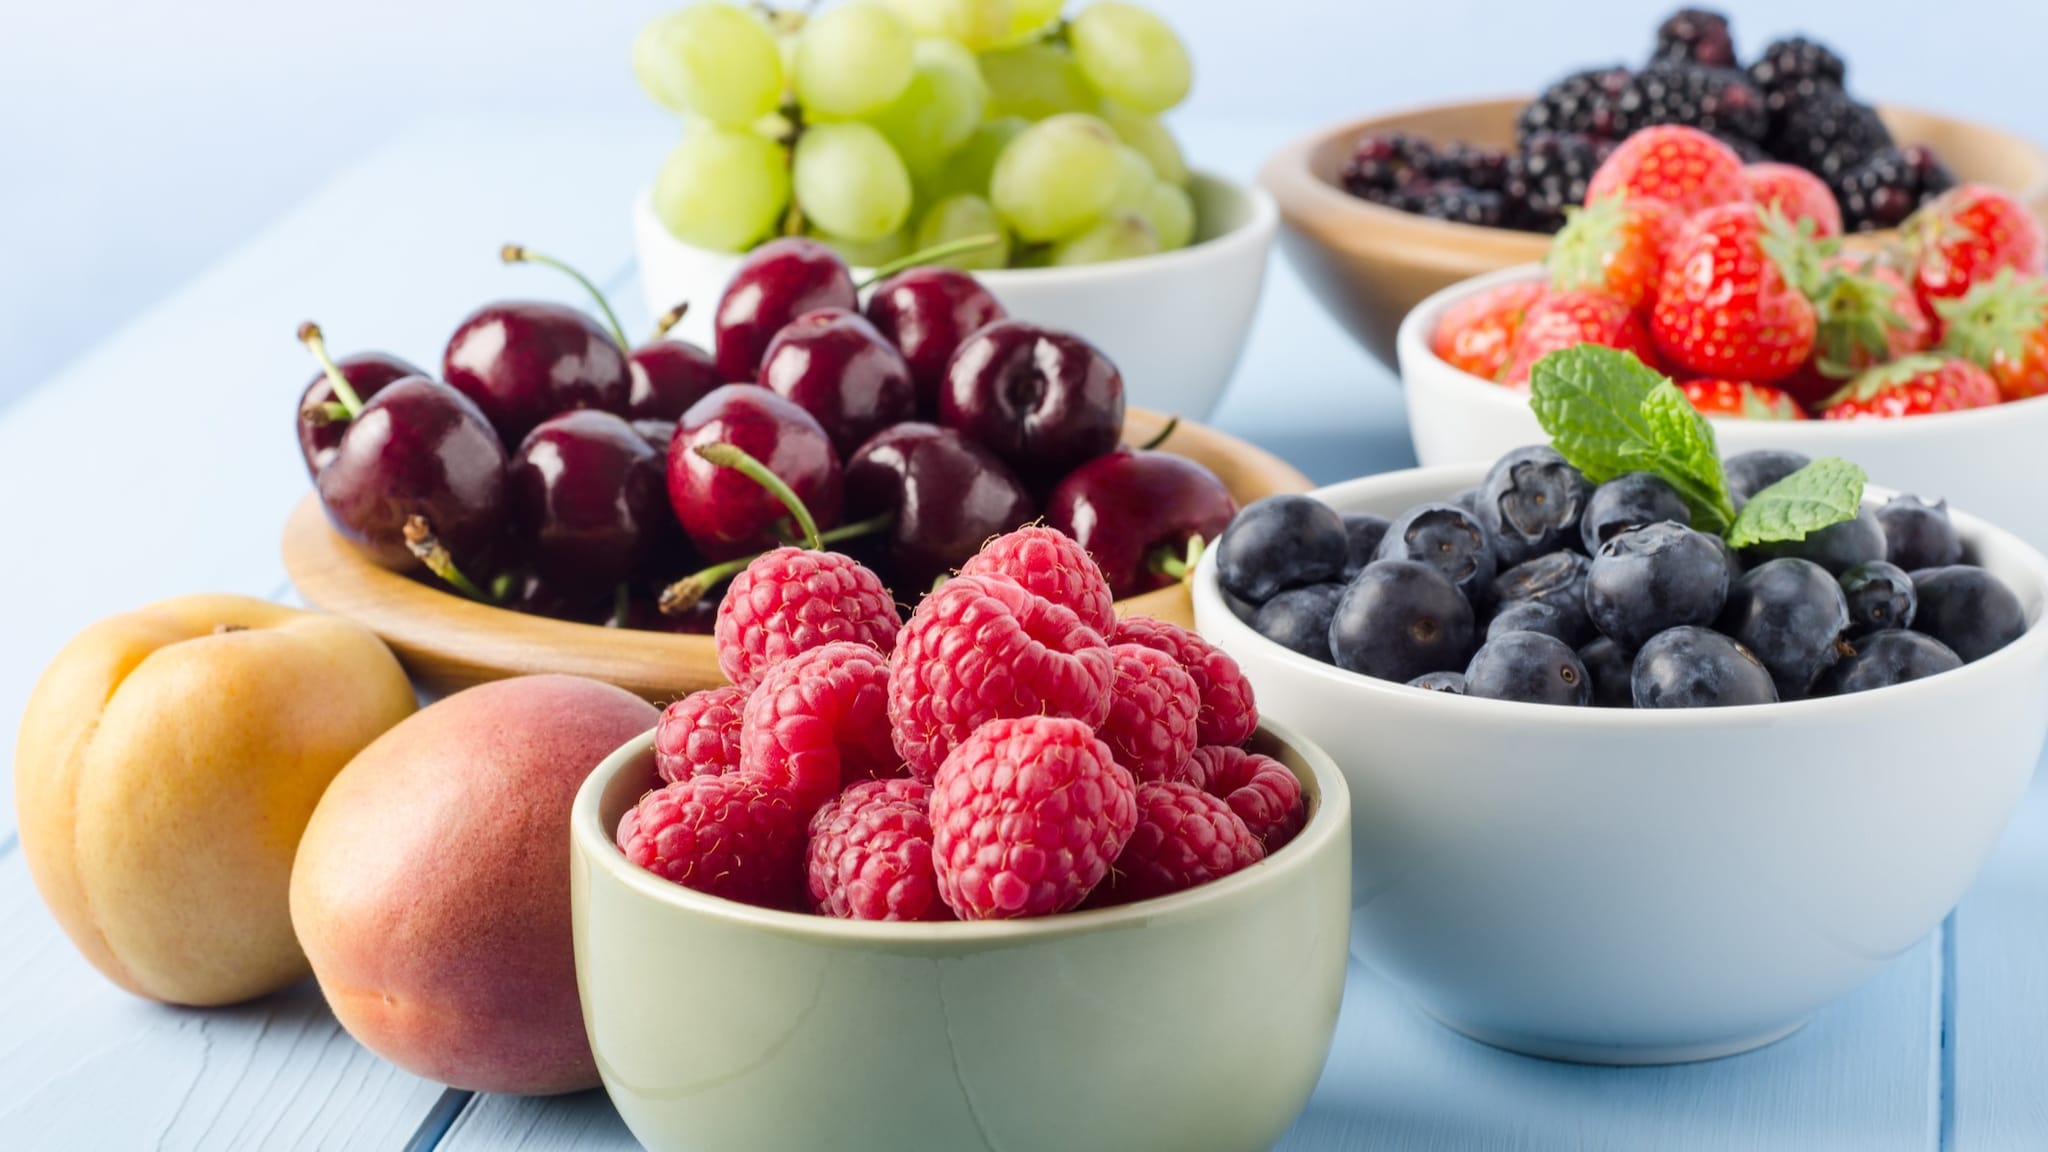 Small bowls with fruit including raspberries, cherries, and blueberries.